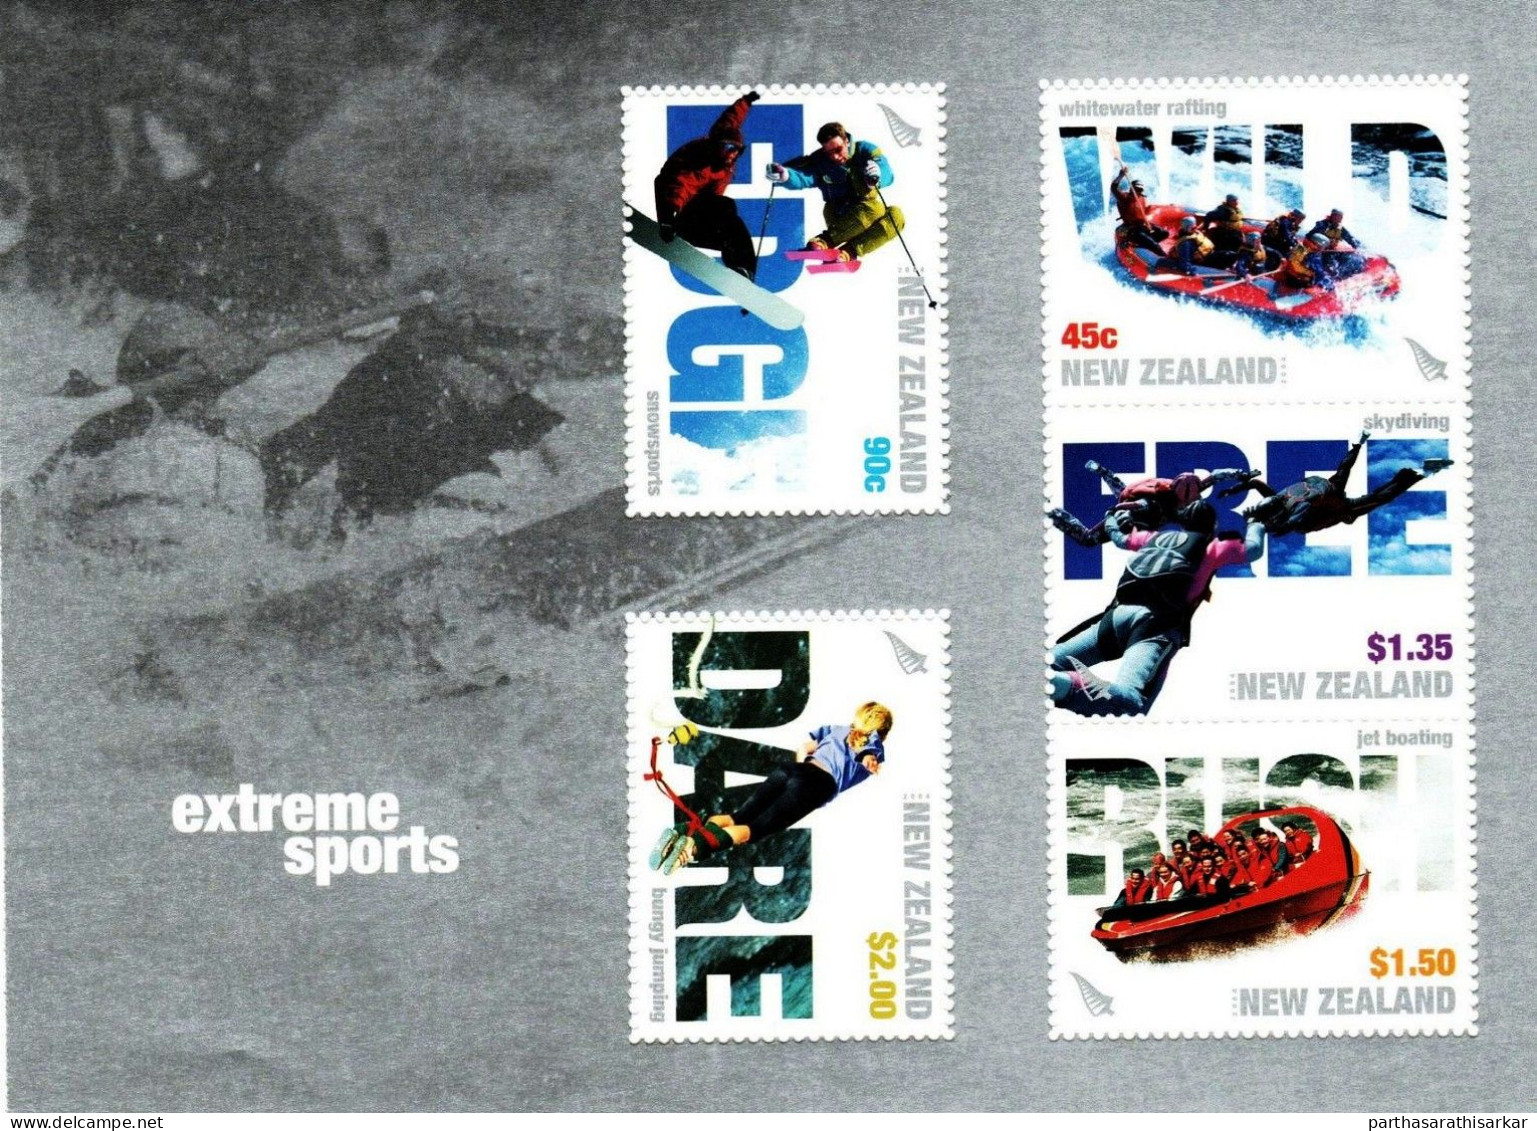 NEW ZEALAND 2004 EXTREME SPORTS BOOKLET MNH (HIGH FACE VALUE AROUND 14.4 NZD)